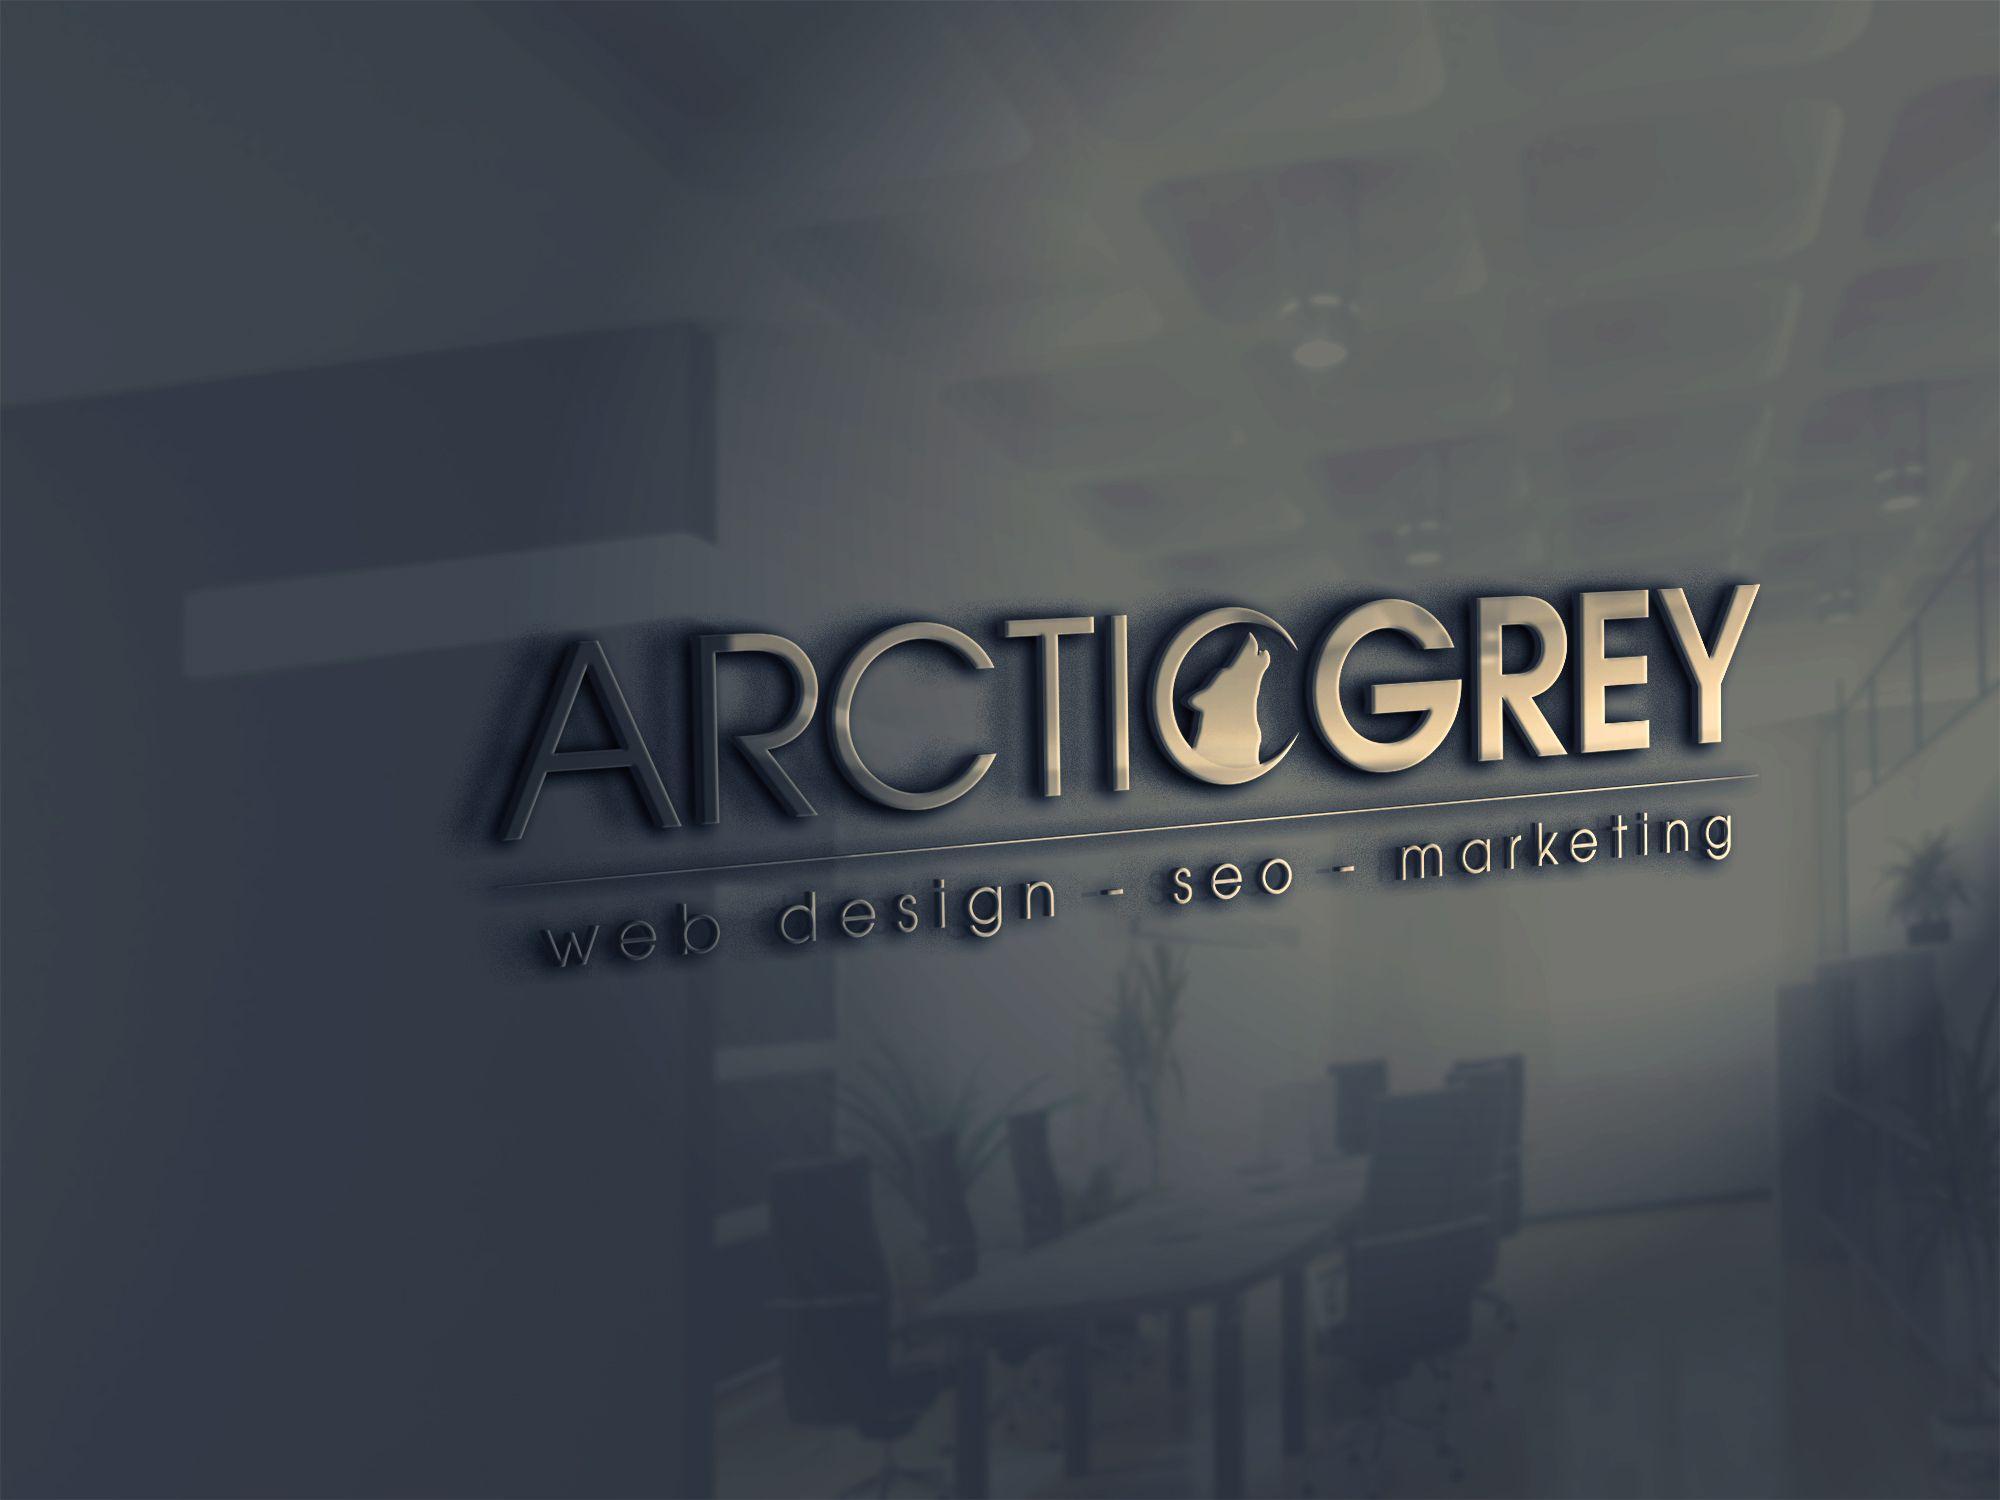 Epic 3 Logo - What's included in the Epic Logo Design Package for $997? – Arctic ...